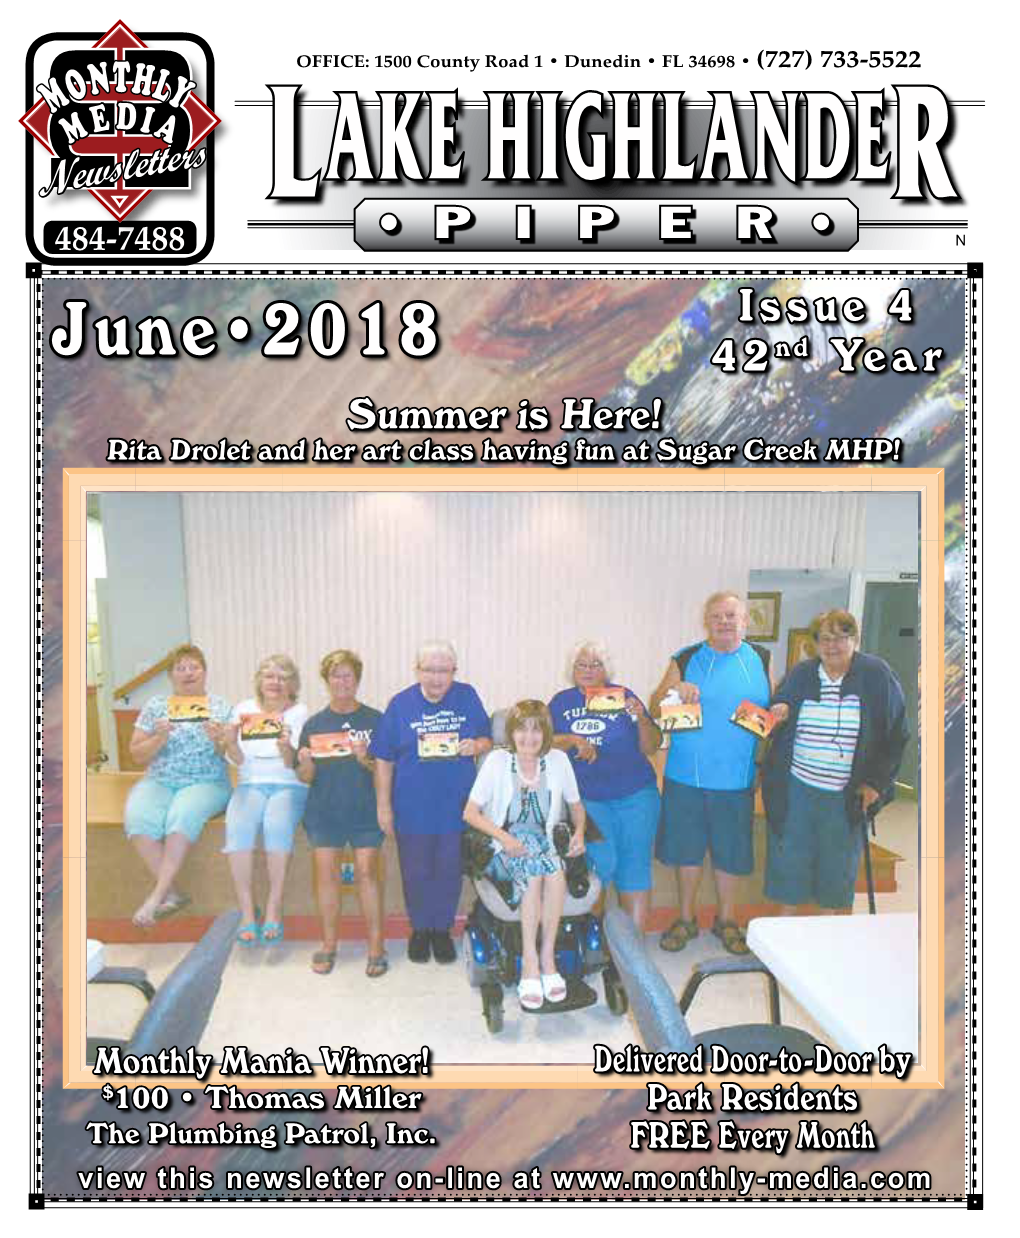 LAKE HIGHLANDER 484-7488 • P I P E R • N Issue 4 June•2018 42Nd Year Summer Is Here! Rita Drolet and Her Art Class Having Fun at Sugar Creek MHP!